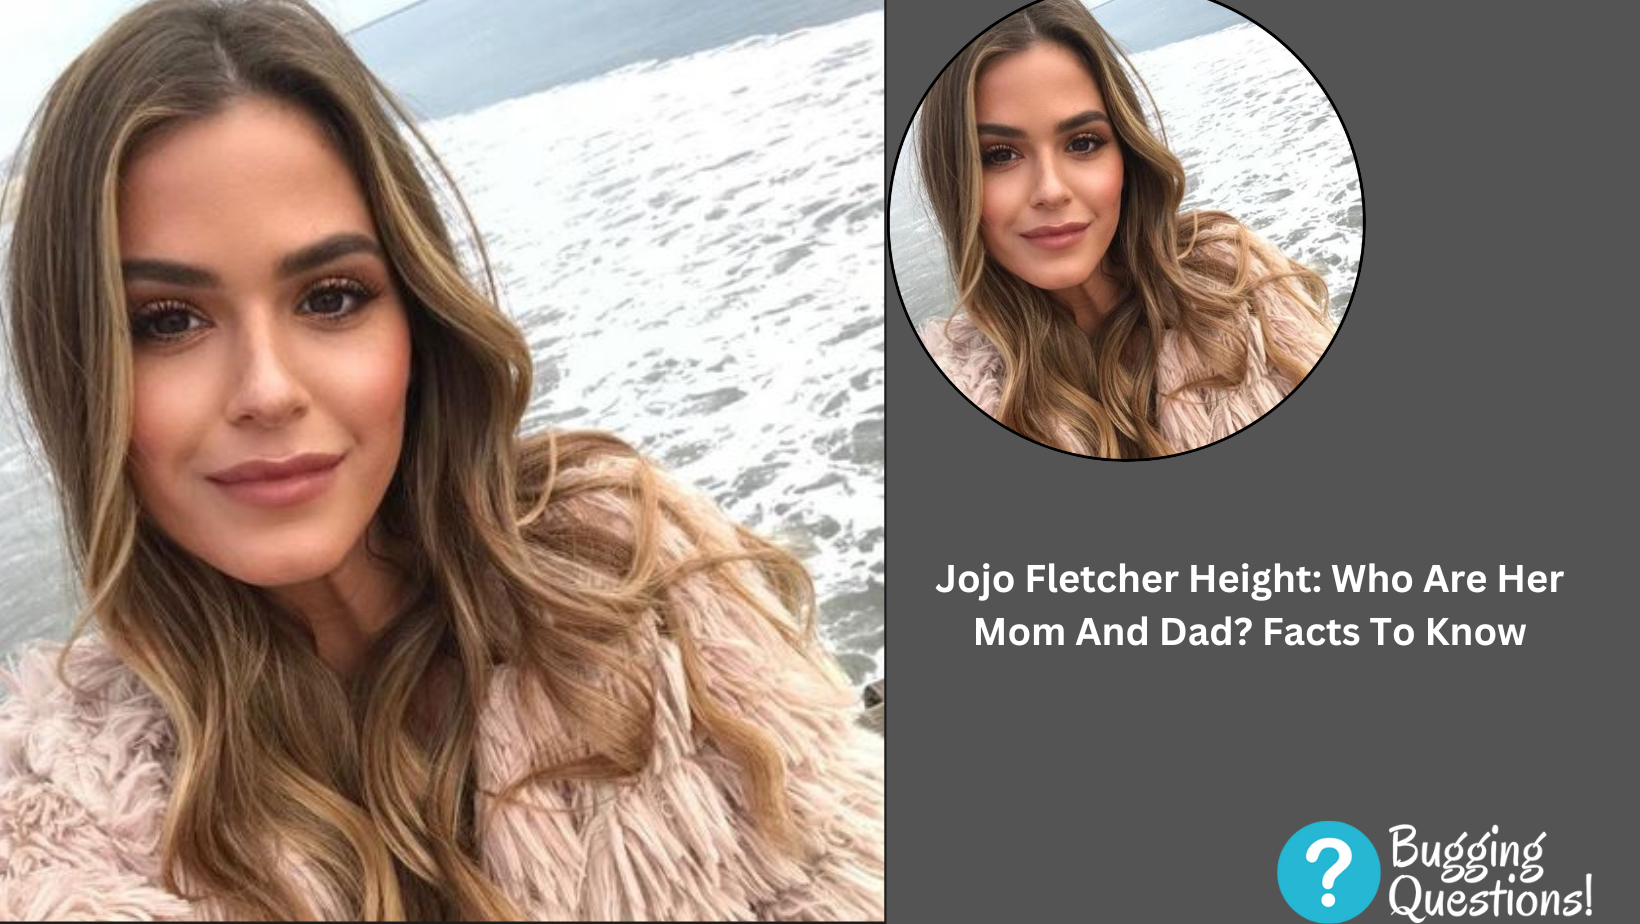 Jojo Fletcher Height: Who Are Her Mom And Dad?